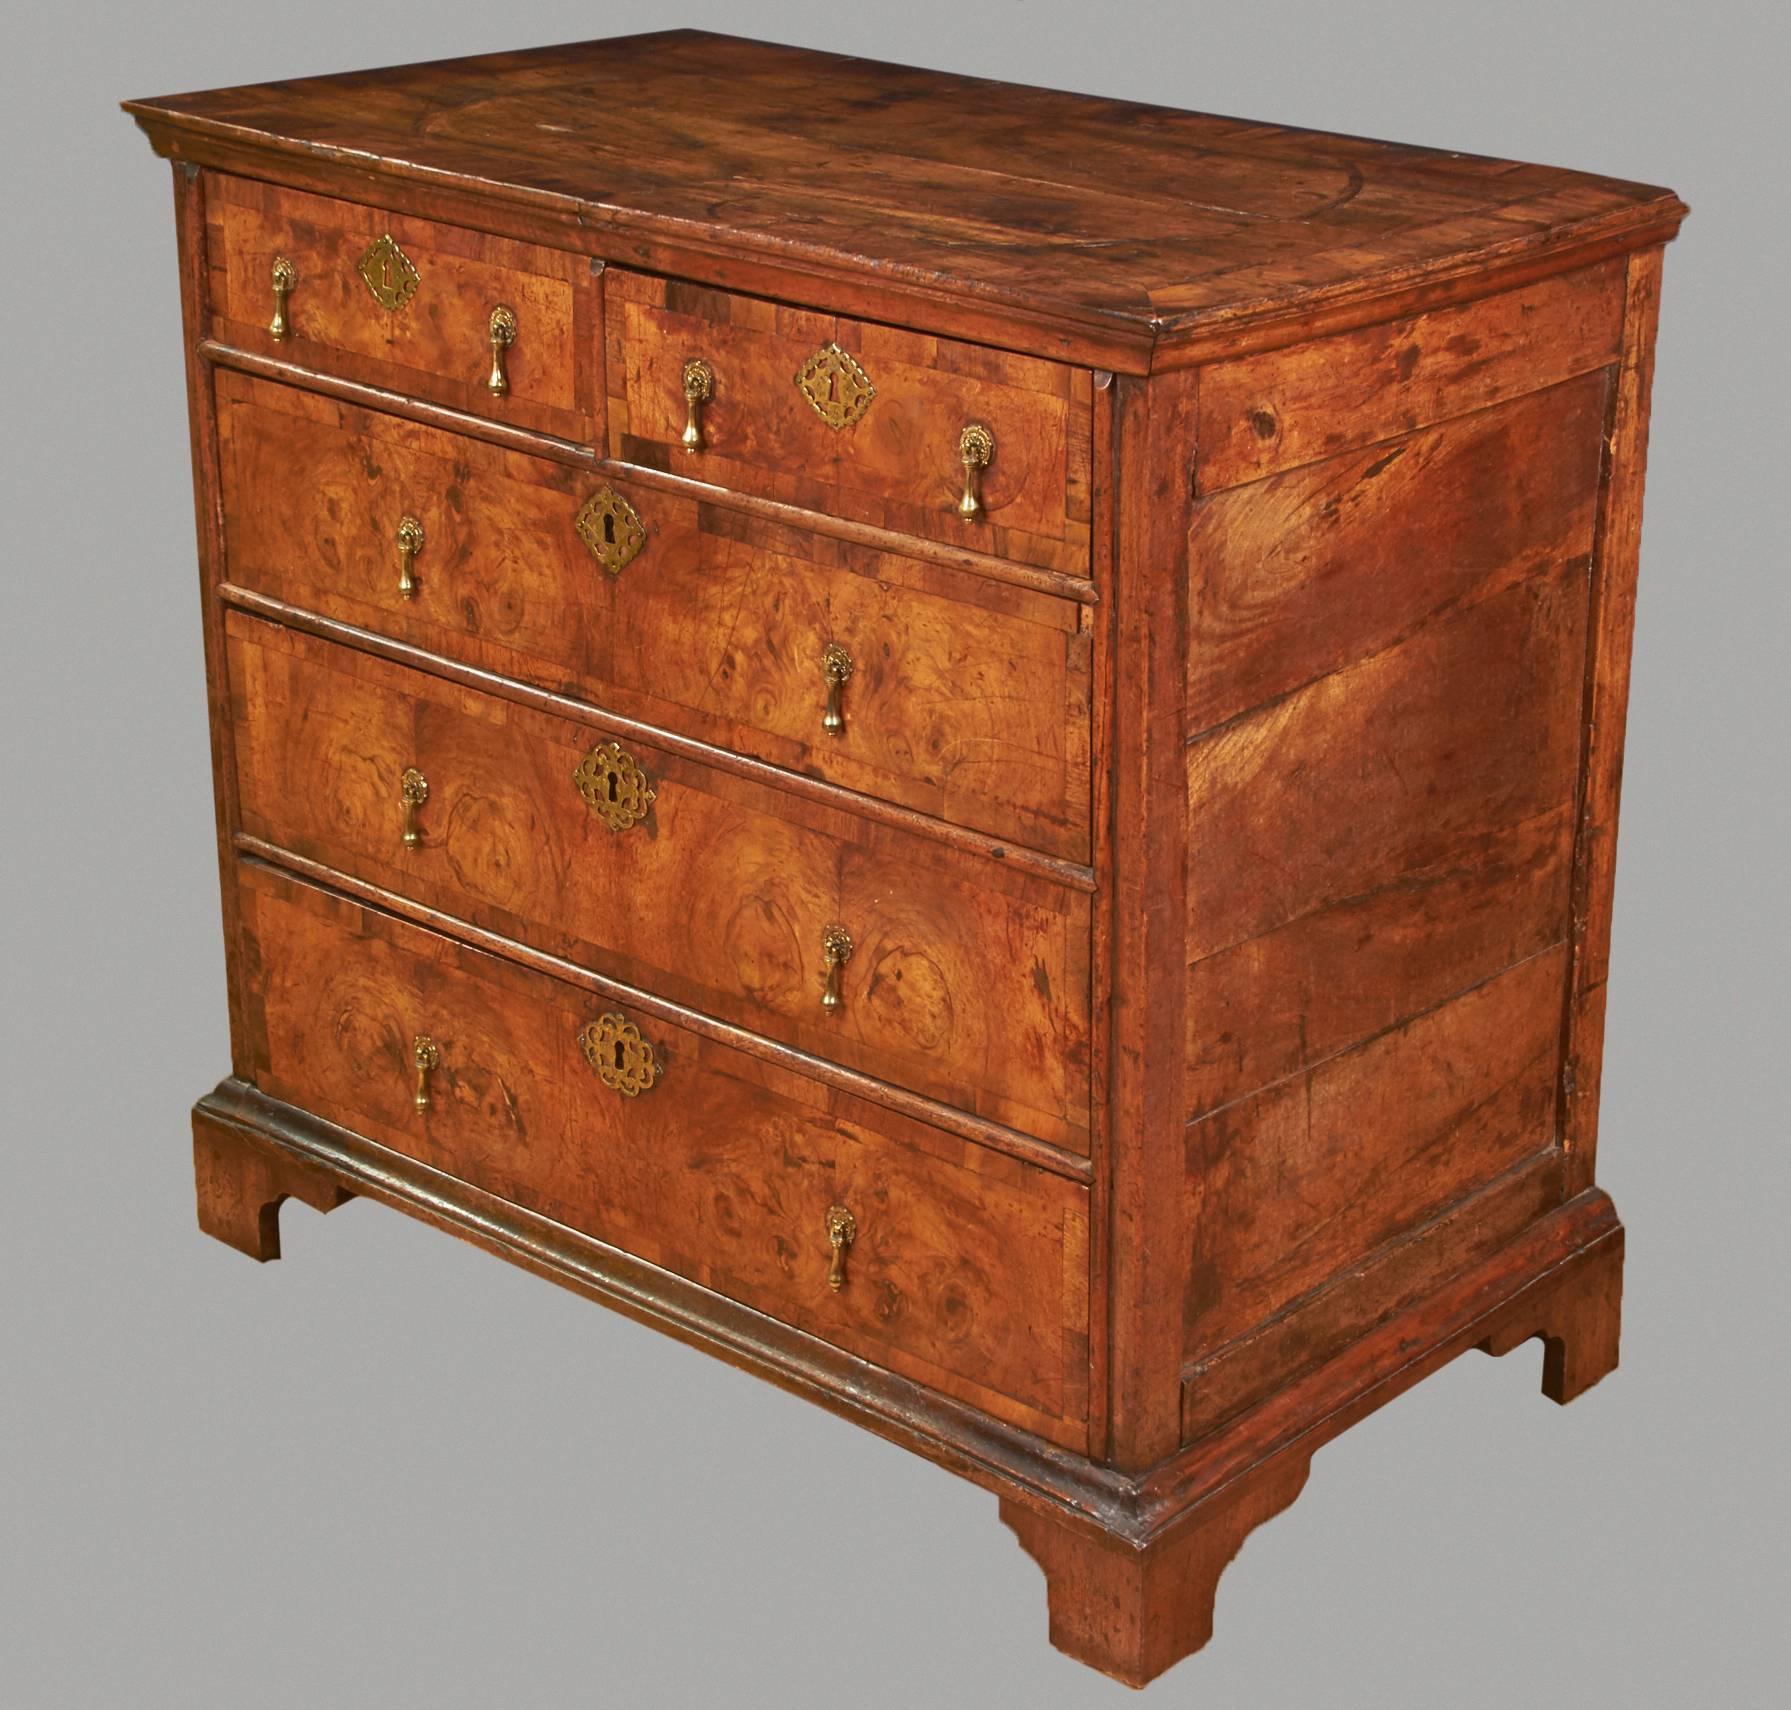 A fine William and Mary walnut chest with paneled sides, the inlaid cross-banded and quarter veneered top above two short and three long banded drawers resting on later bracket feet, circa 1690-1700. Excellent old color and patina.